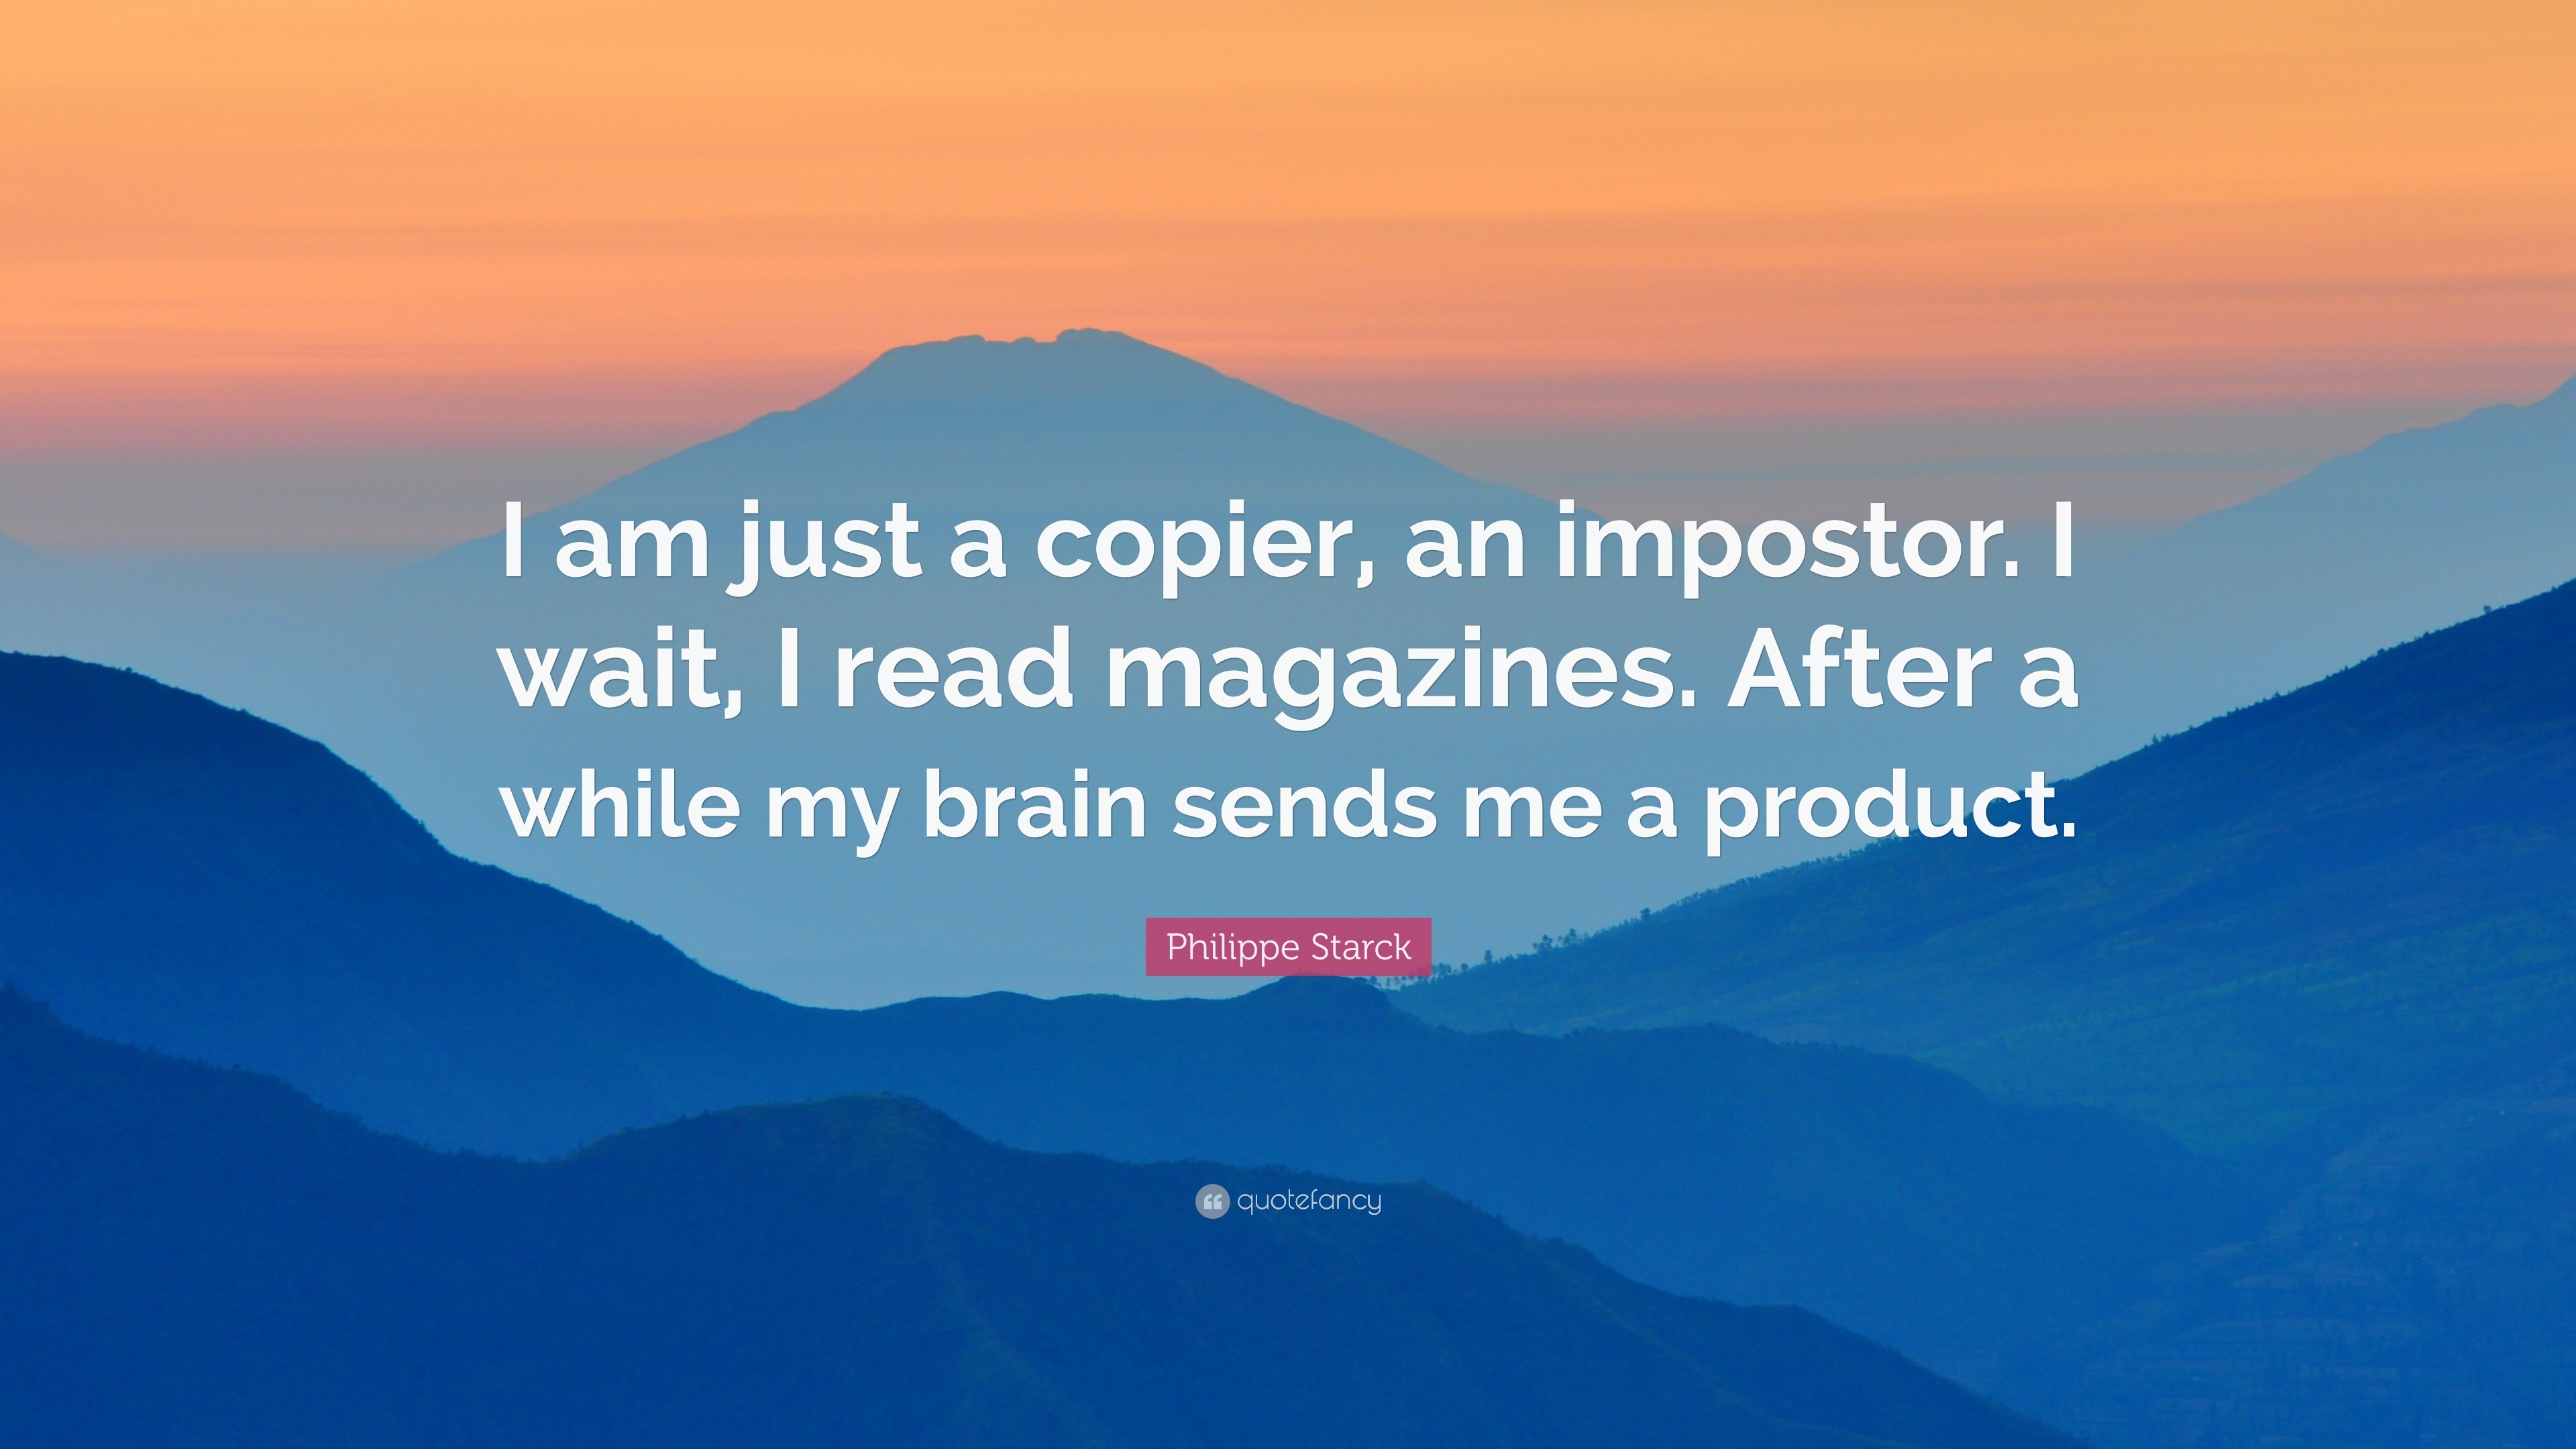 Philippe Starck Quote “I am just a copier, an impostor. I wait, I read